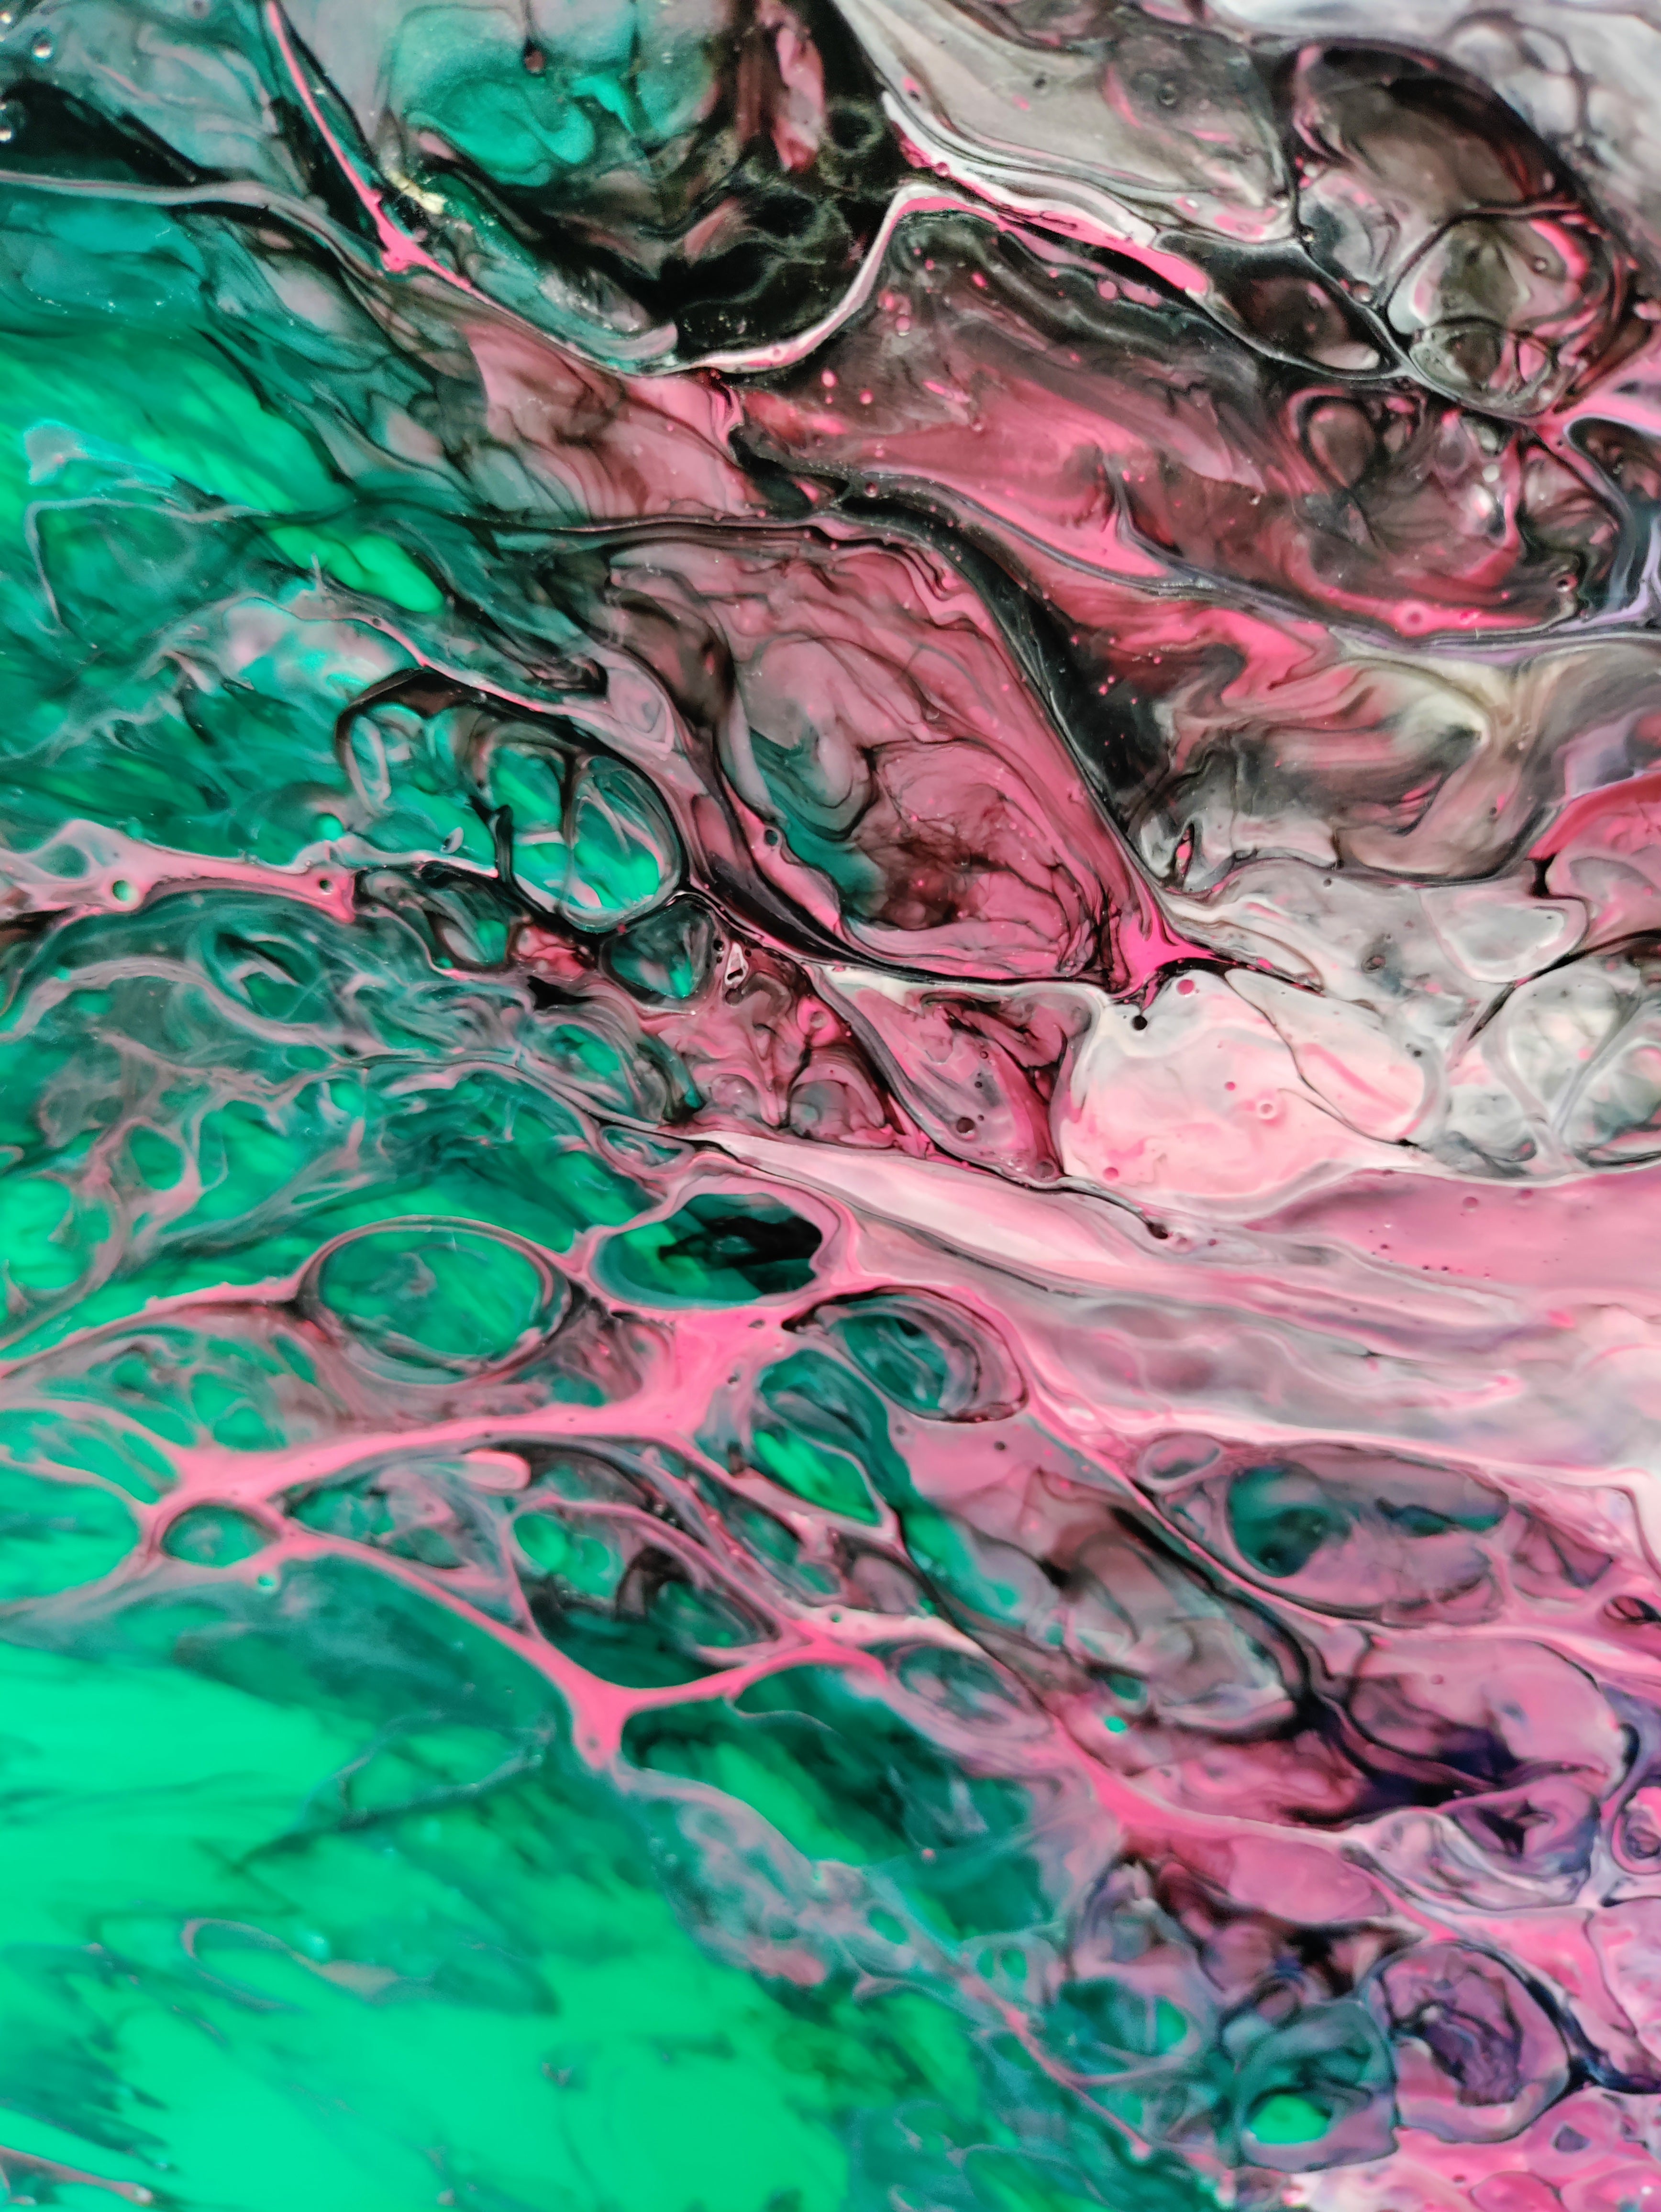 Fluid Art: Acrylic Paint Pouring Workshop (In-person)